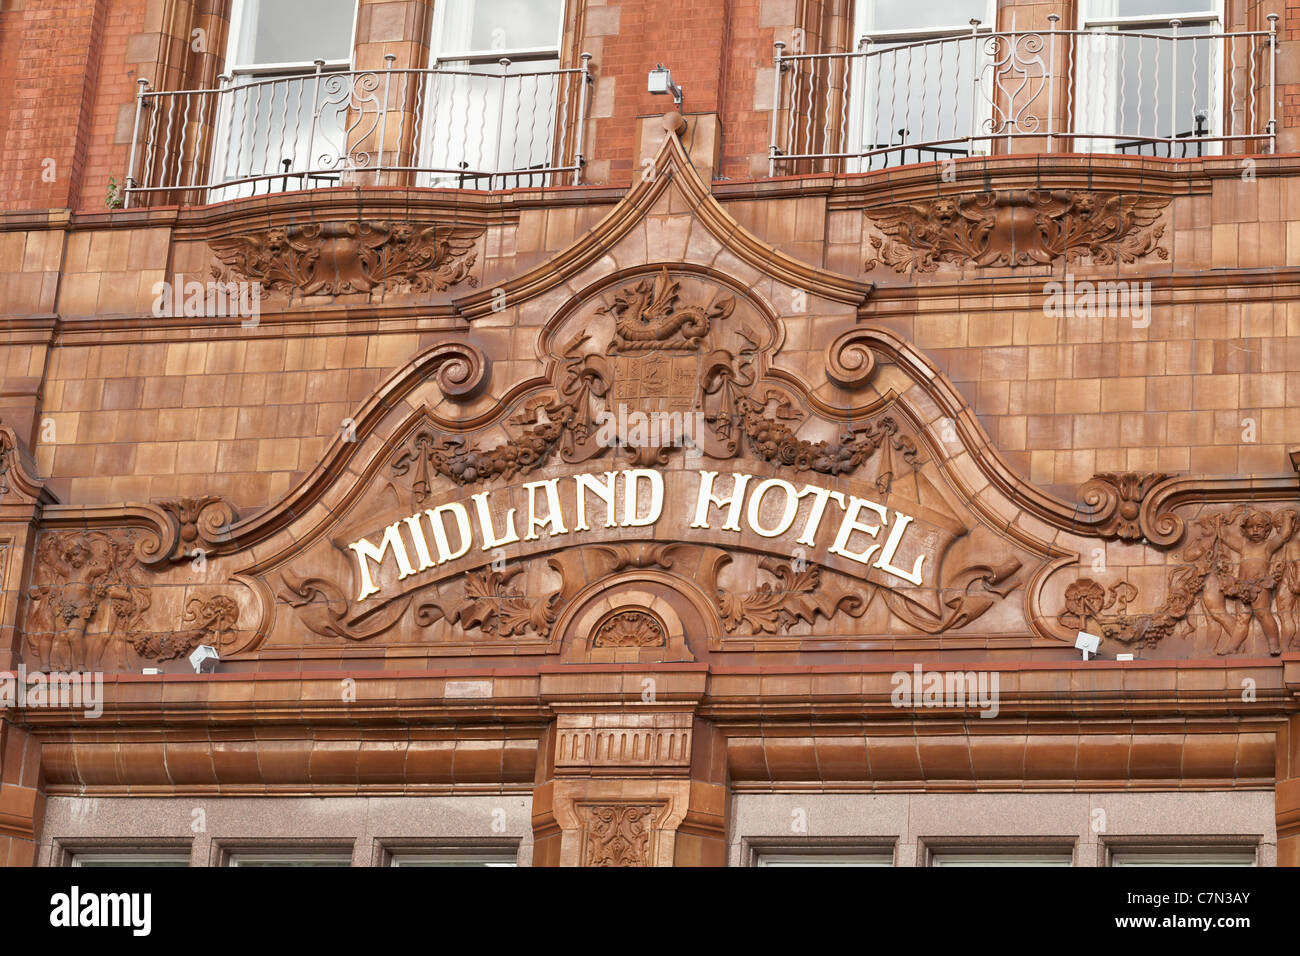 Midland hotel in Manchester, England Stock Photo